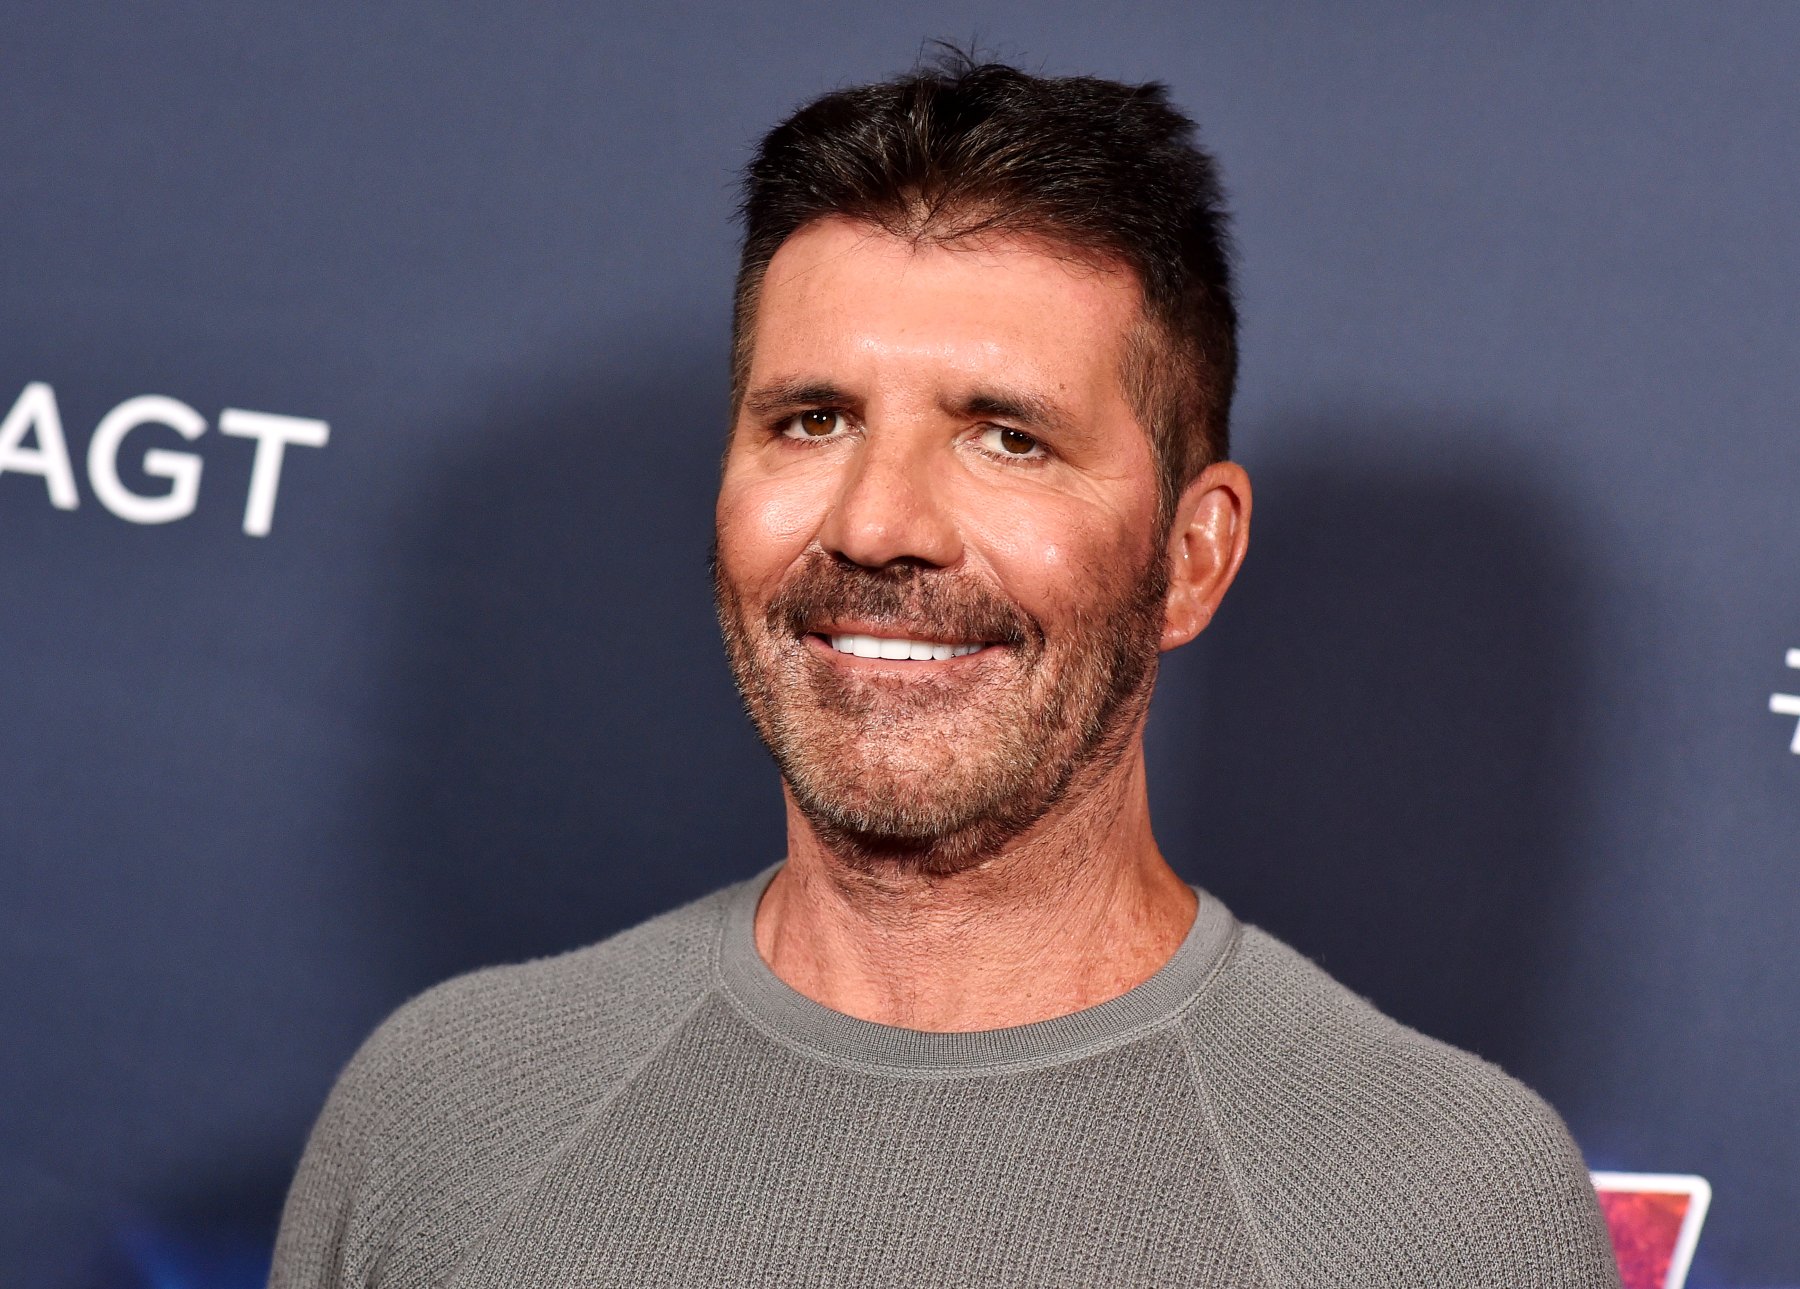 Simon Cowell Has Not Watched ‘American Idol’ in ‘So Many Years’ Us Weekly